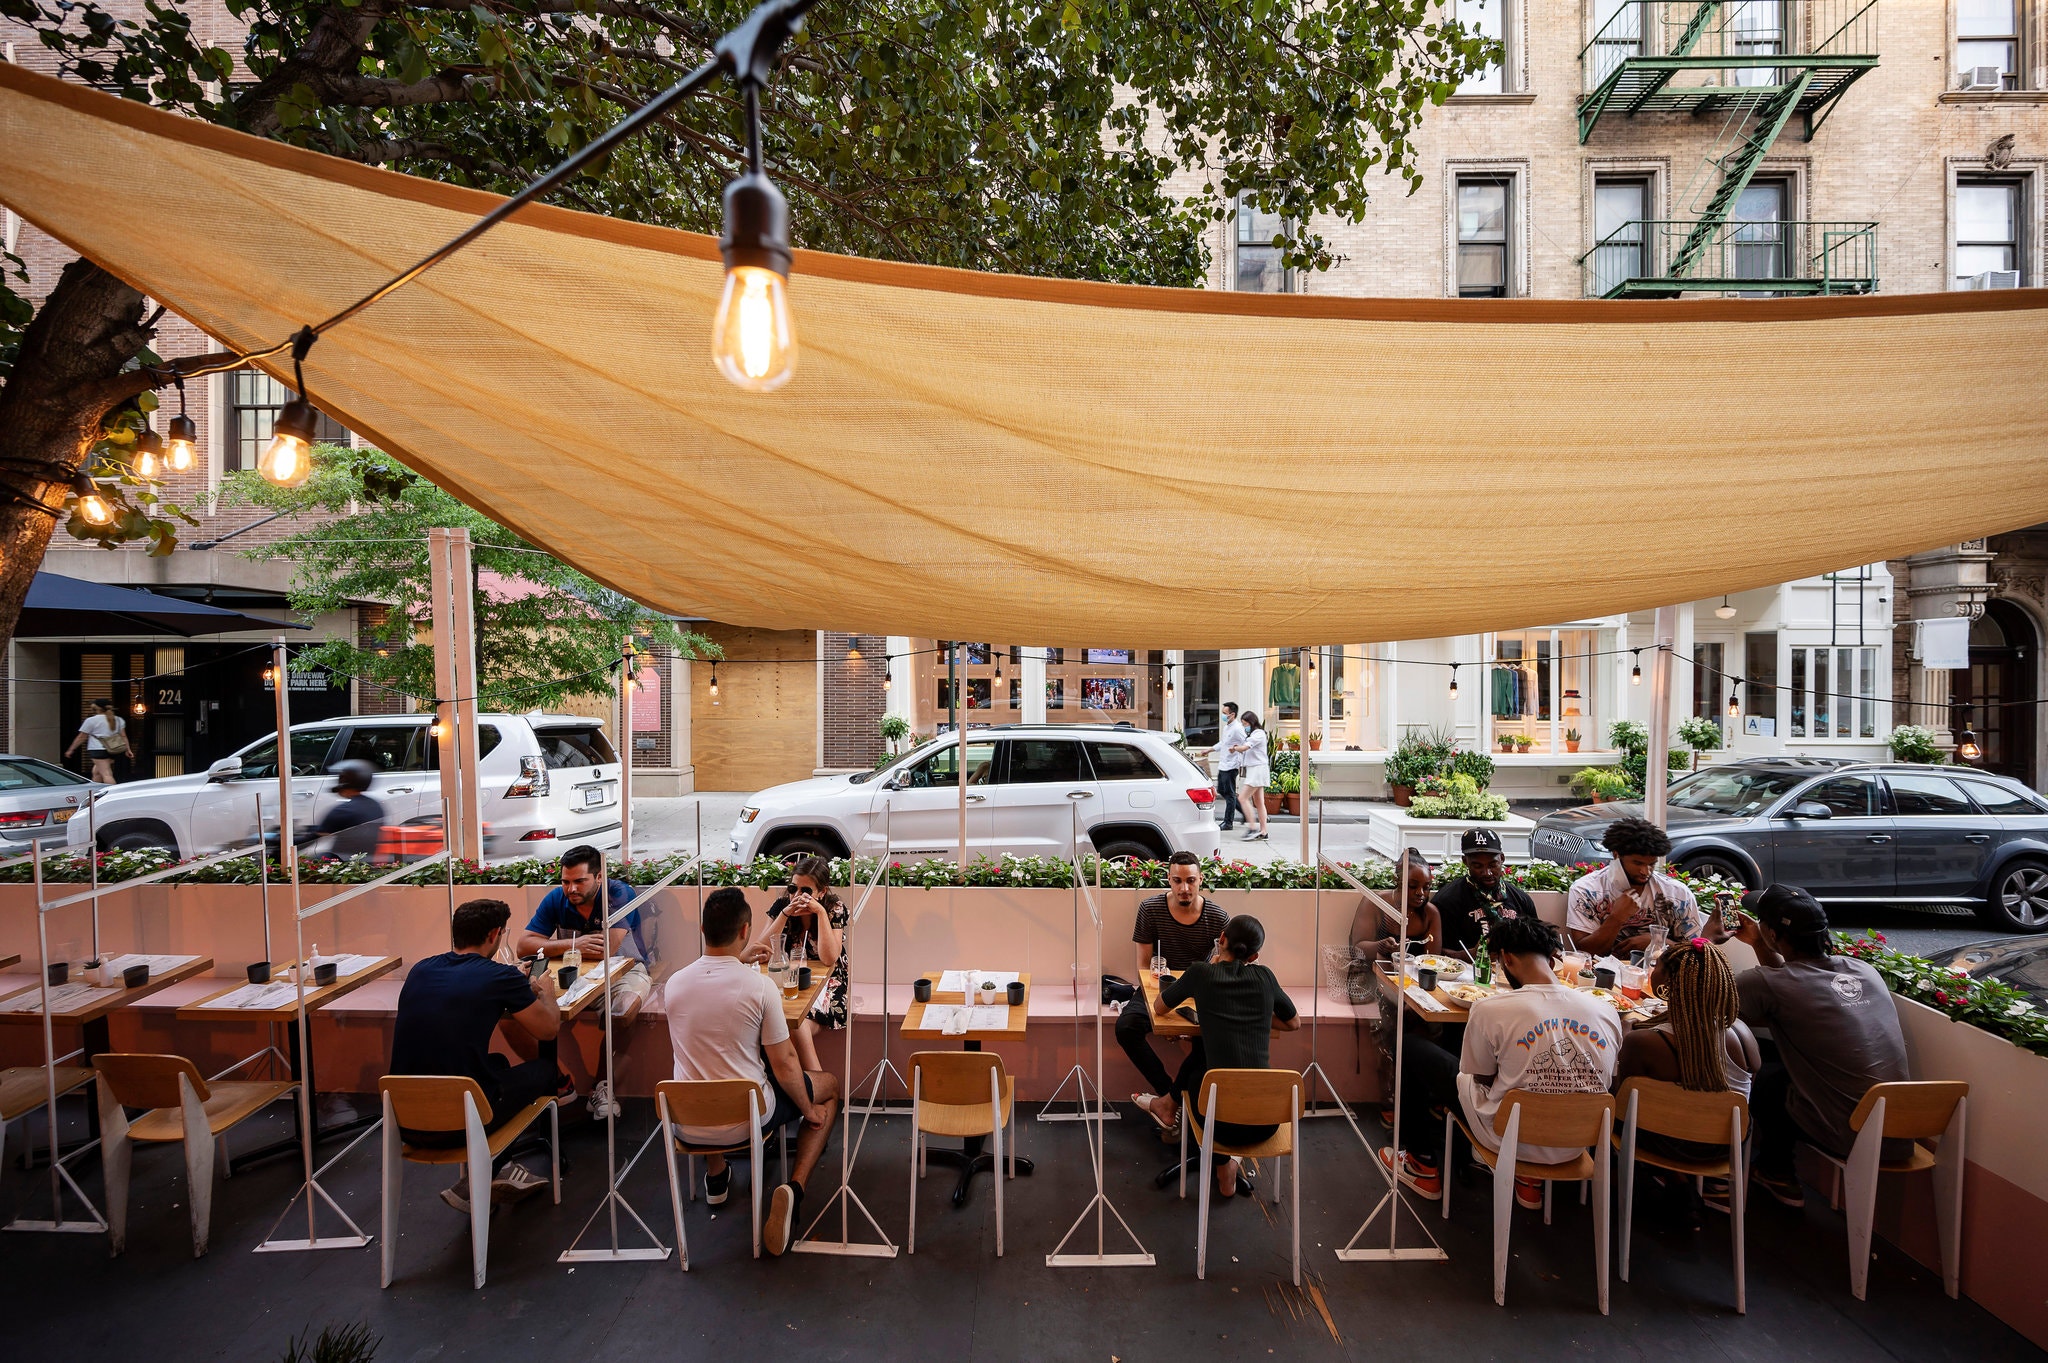 Al Fresco Architecture How New York S Streets Have Been Transformed For Outdoor Dining